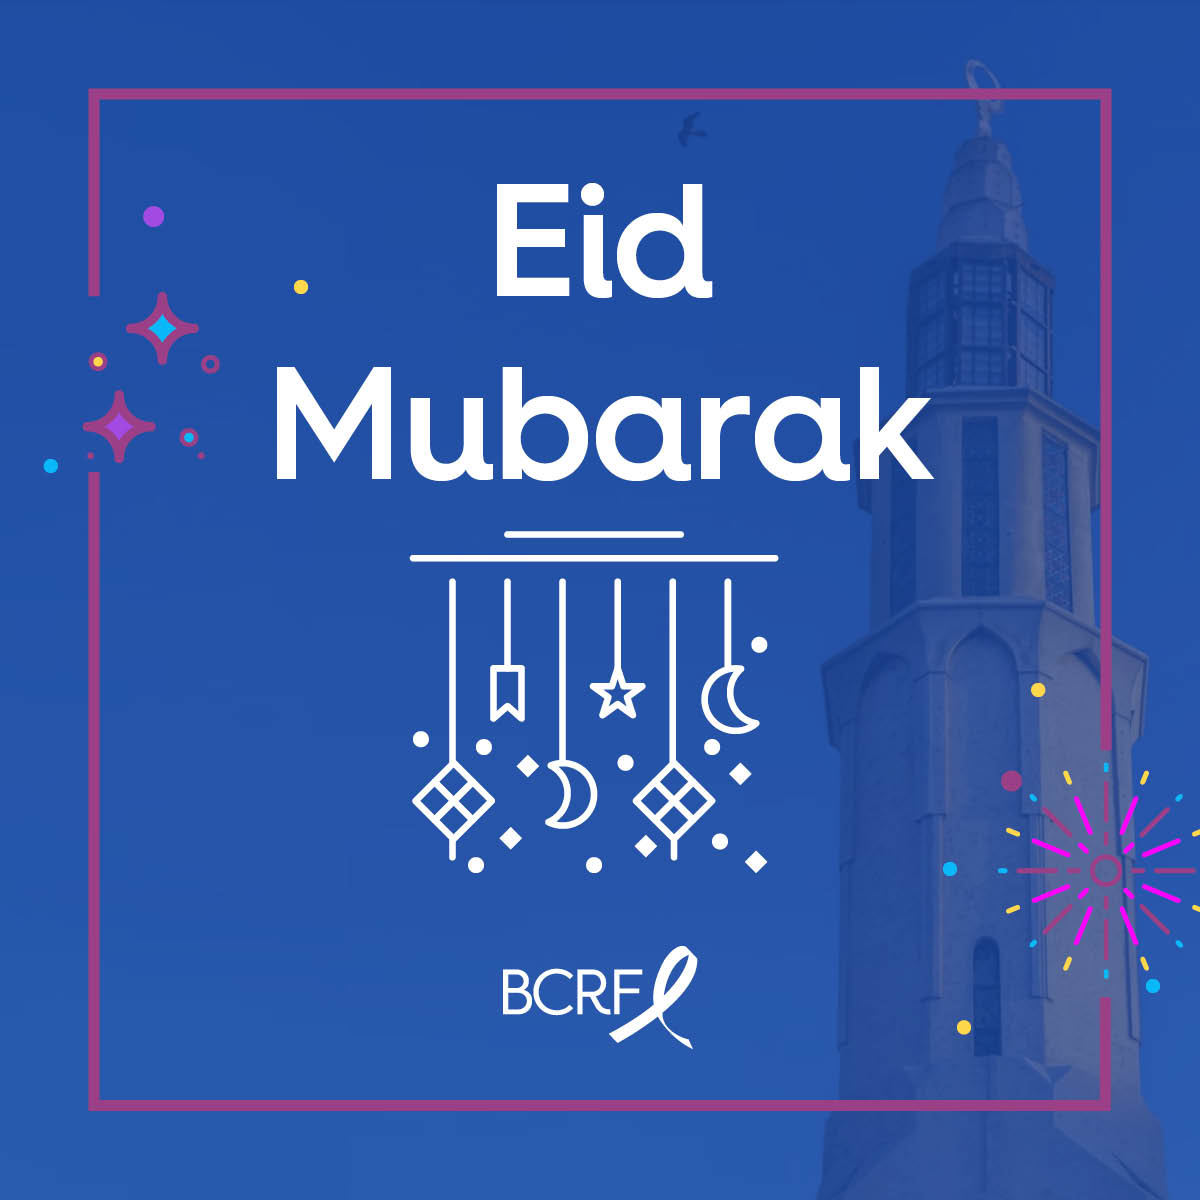 Eid Mubarak! The BCRF family sends our warmest wishes to all who are celebrating Eid al-Fitr.